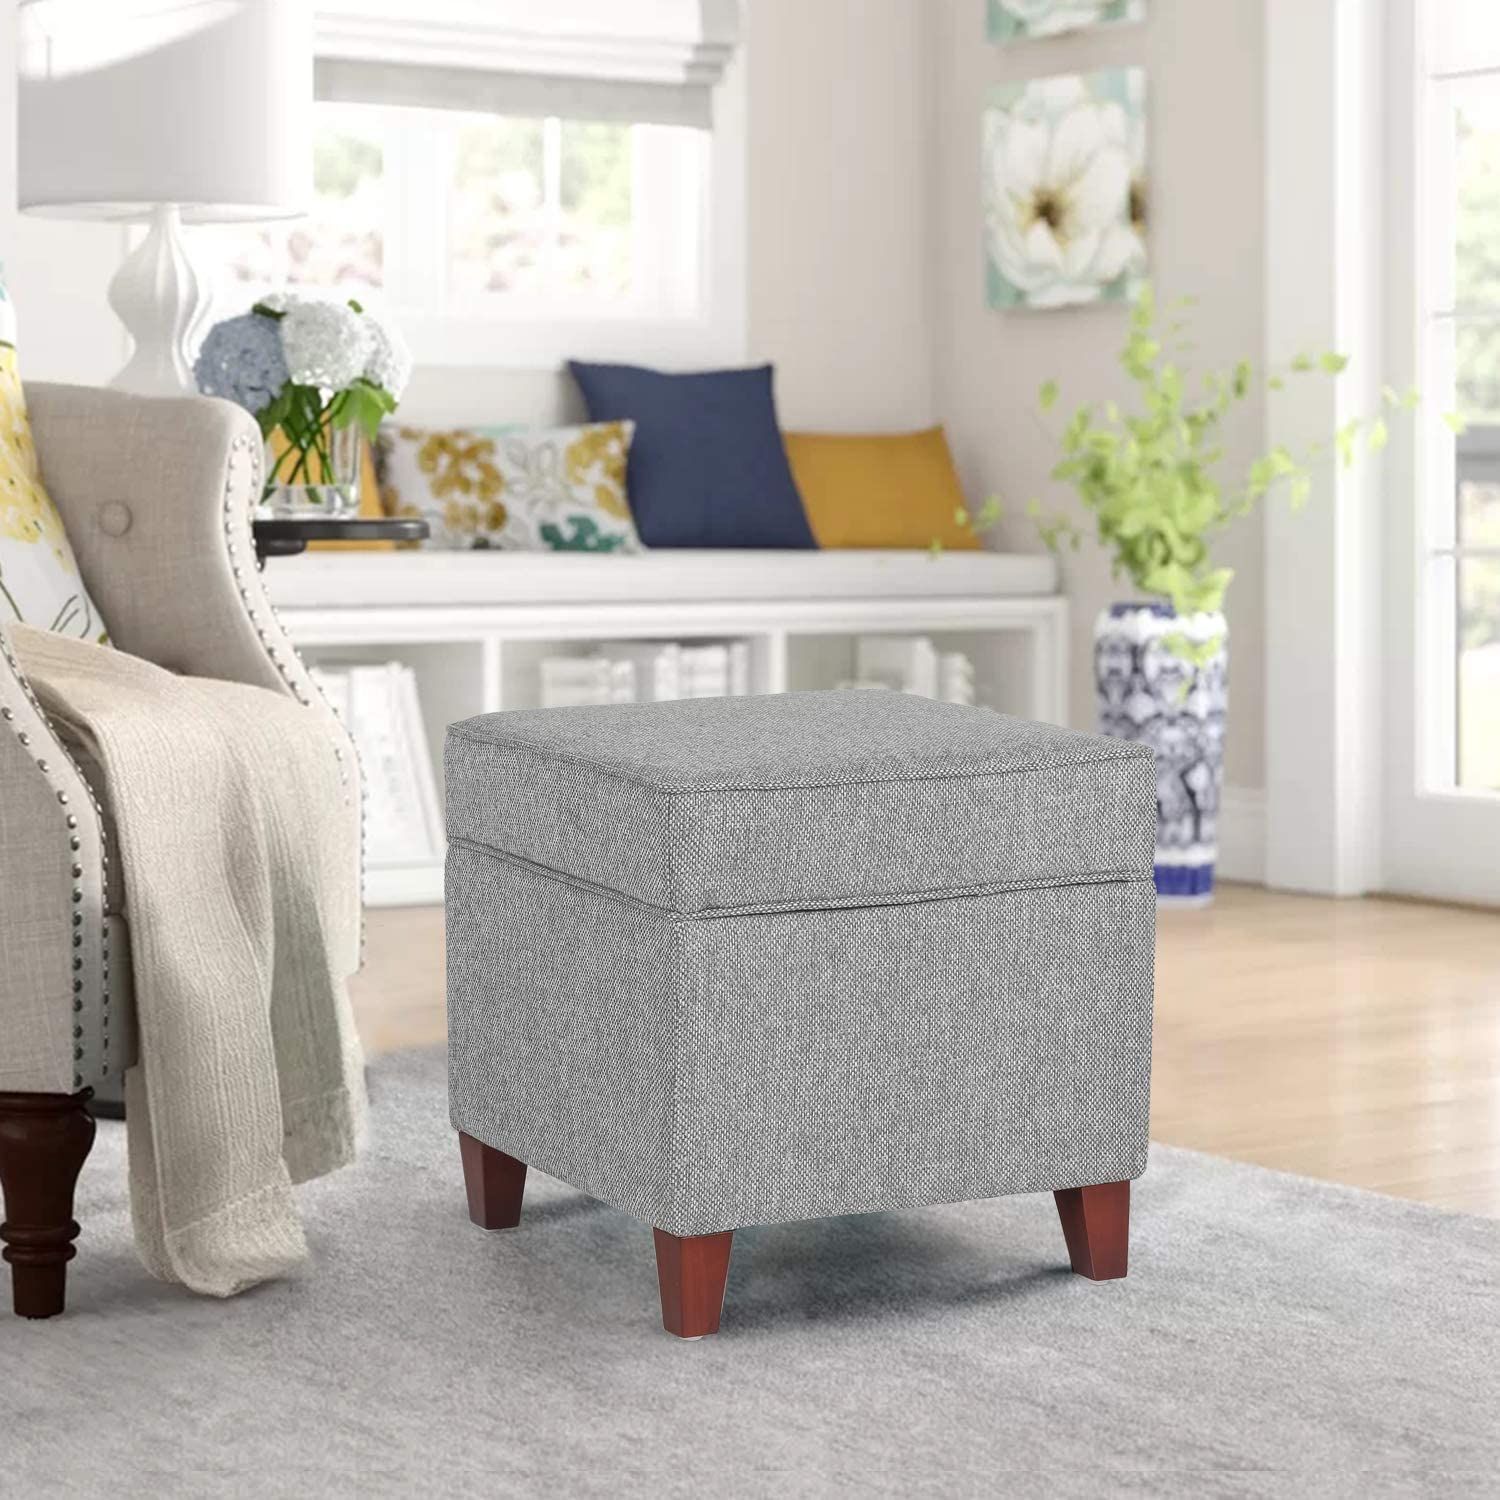 Homebeez 17'' Square Ottoman With Storage  Small Storage Ottoman Foot Throughout Gray And White Fabric Ottomans With Wooden Base (View 10 of 17)